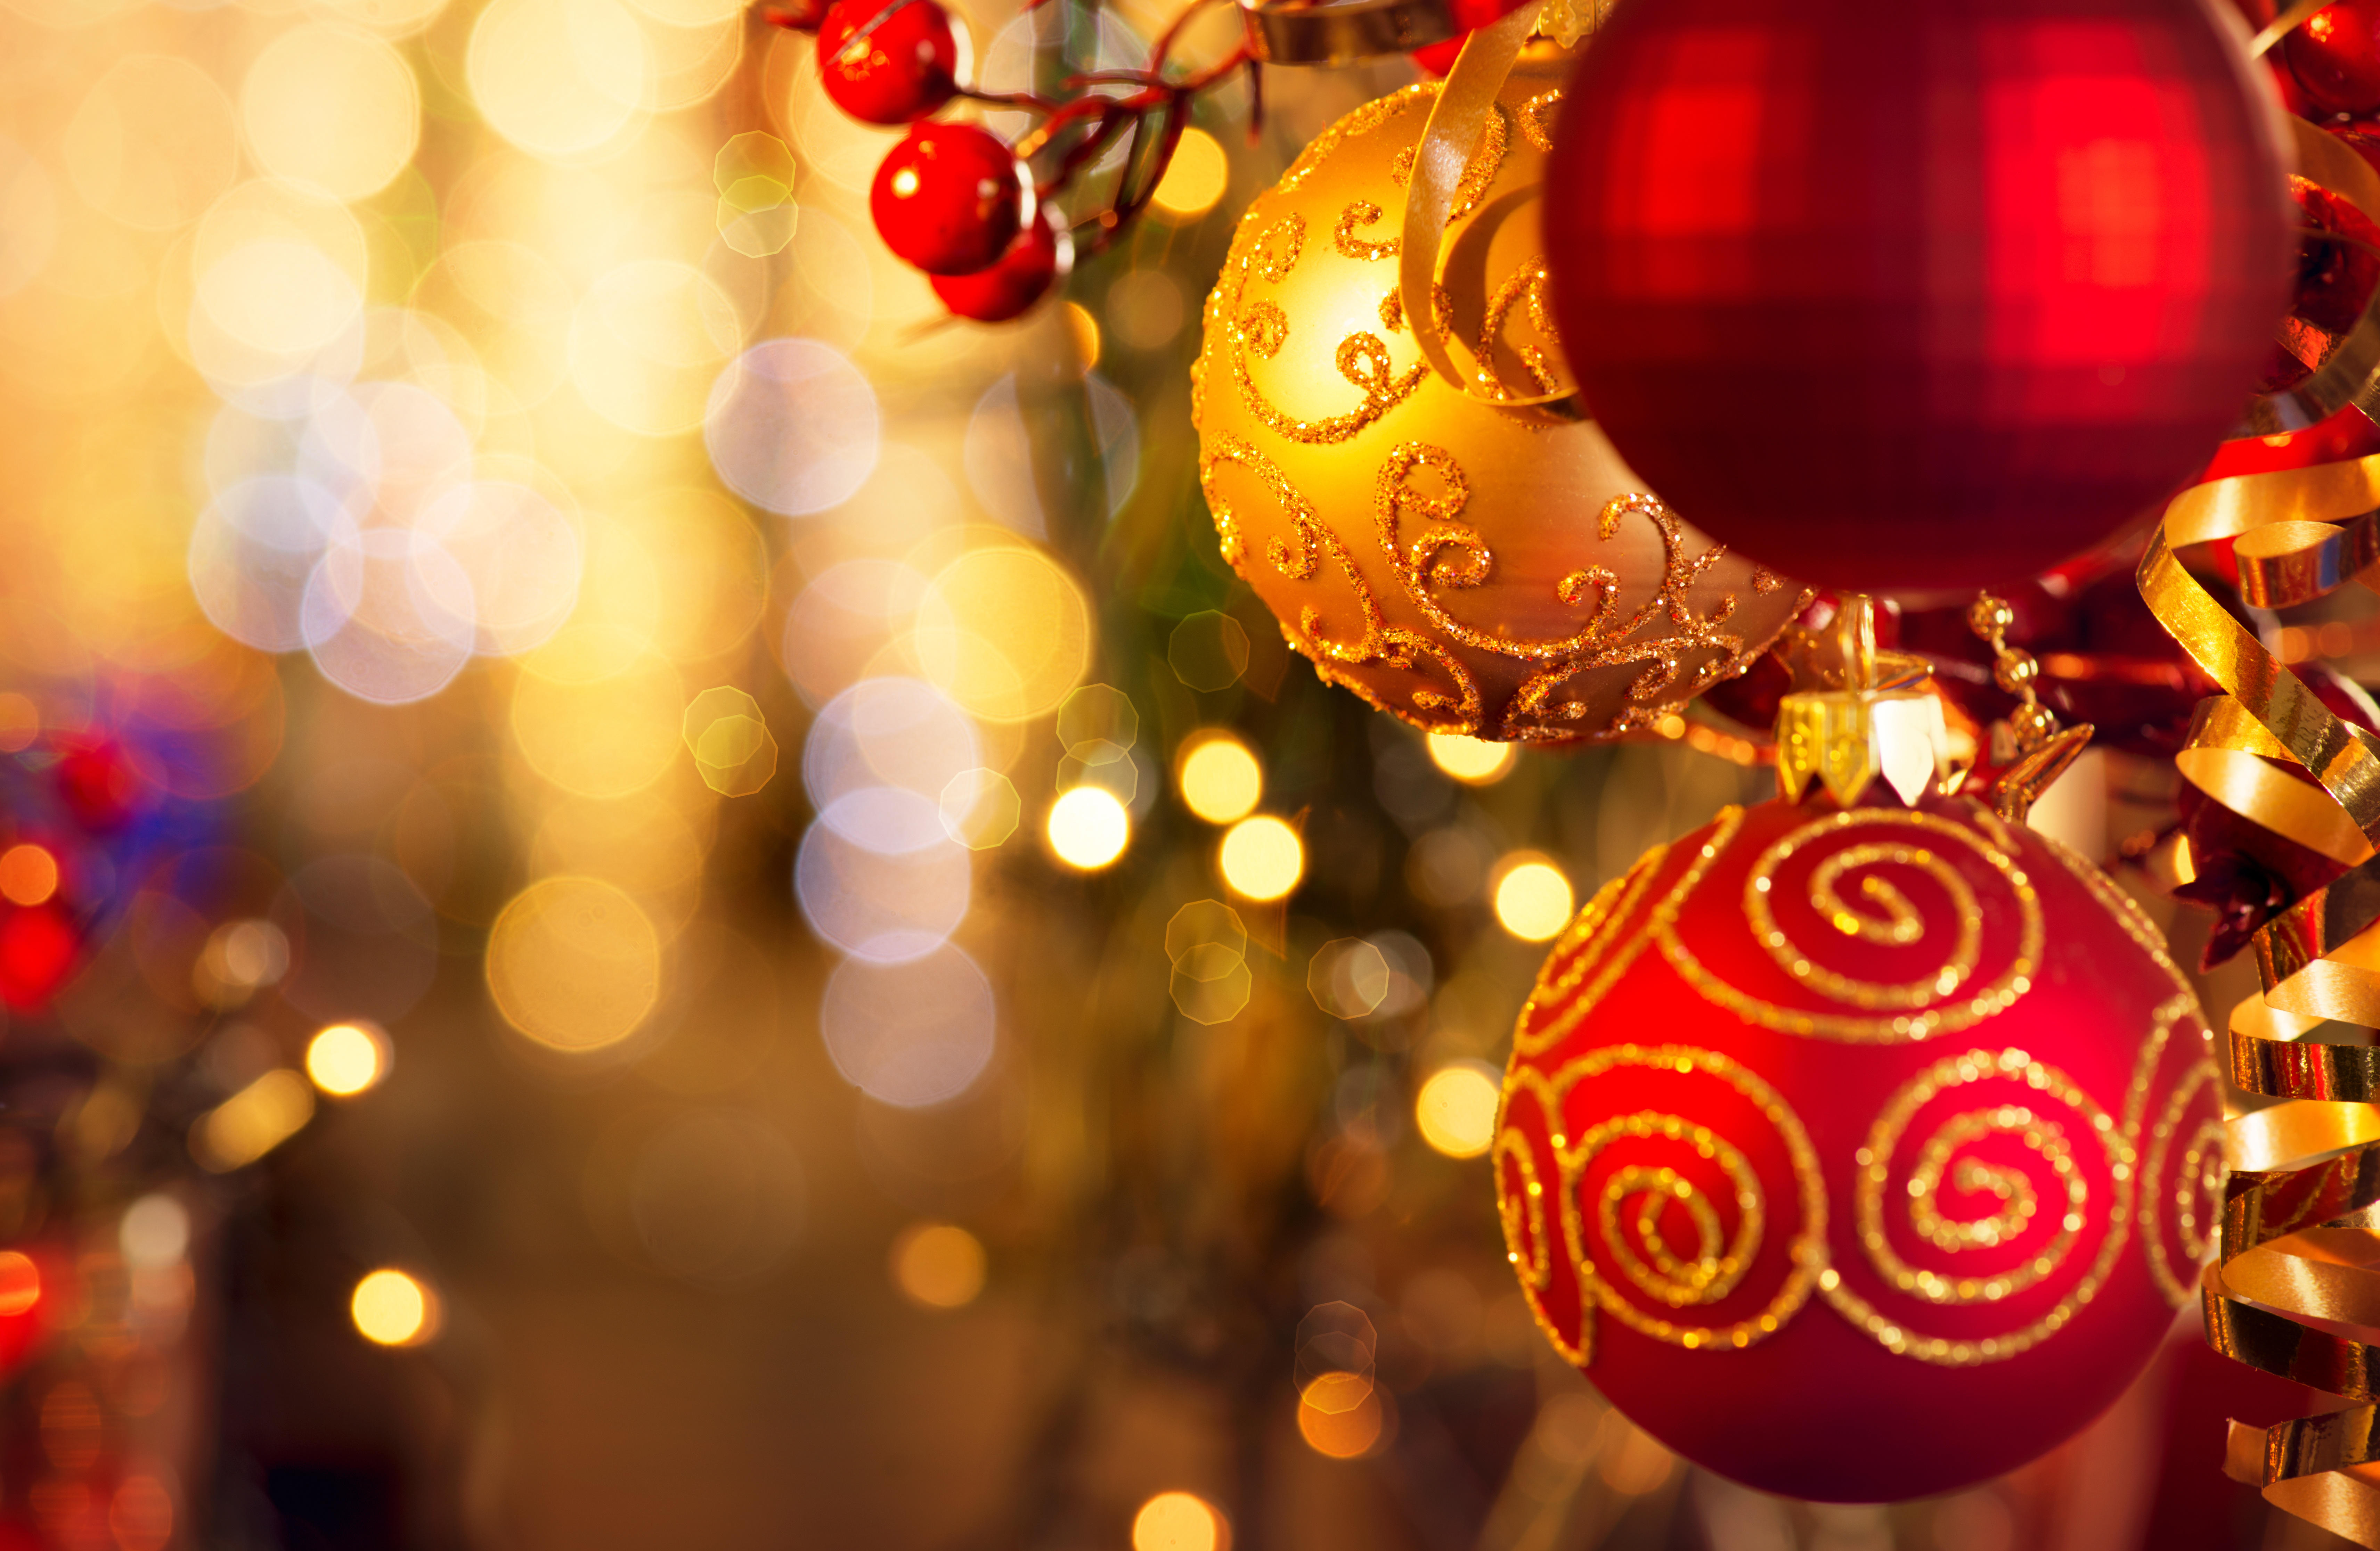 Wallpapers elements New Year Christmas decorations on the desktop